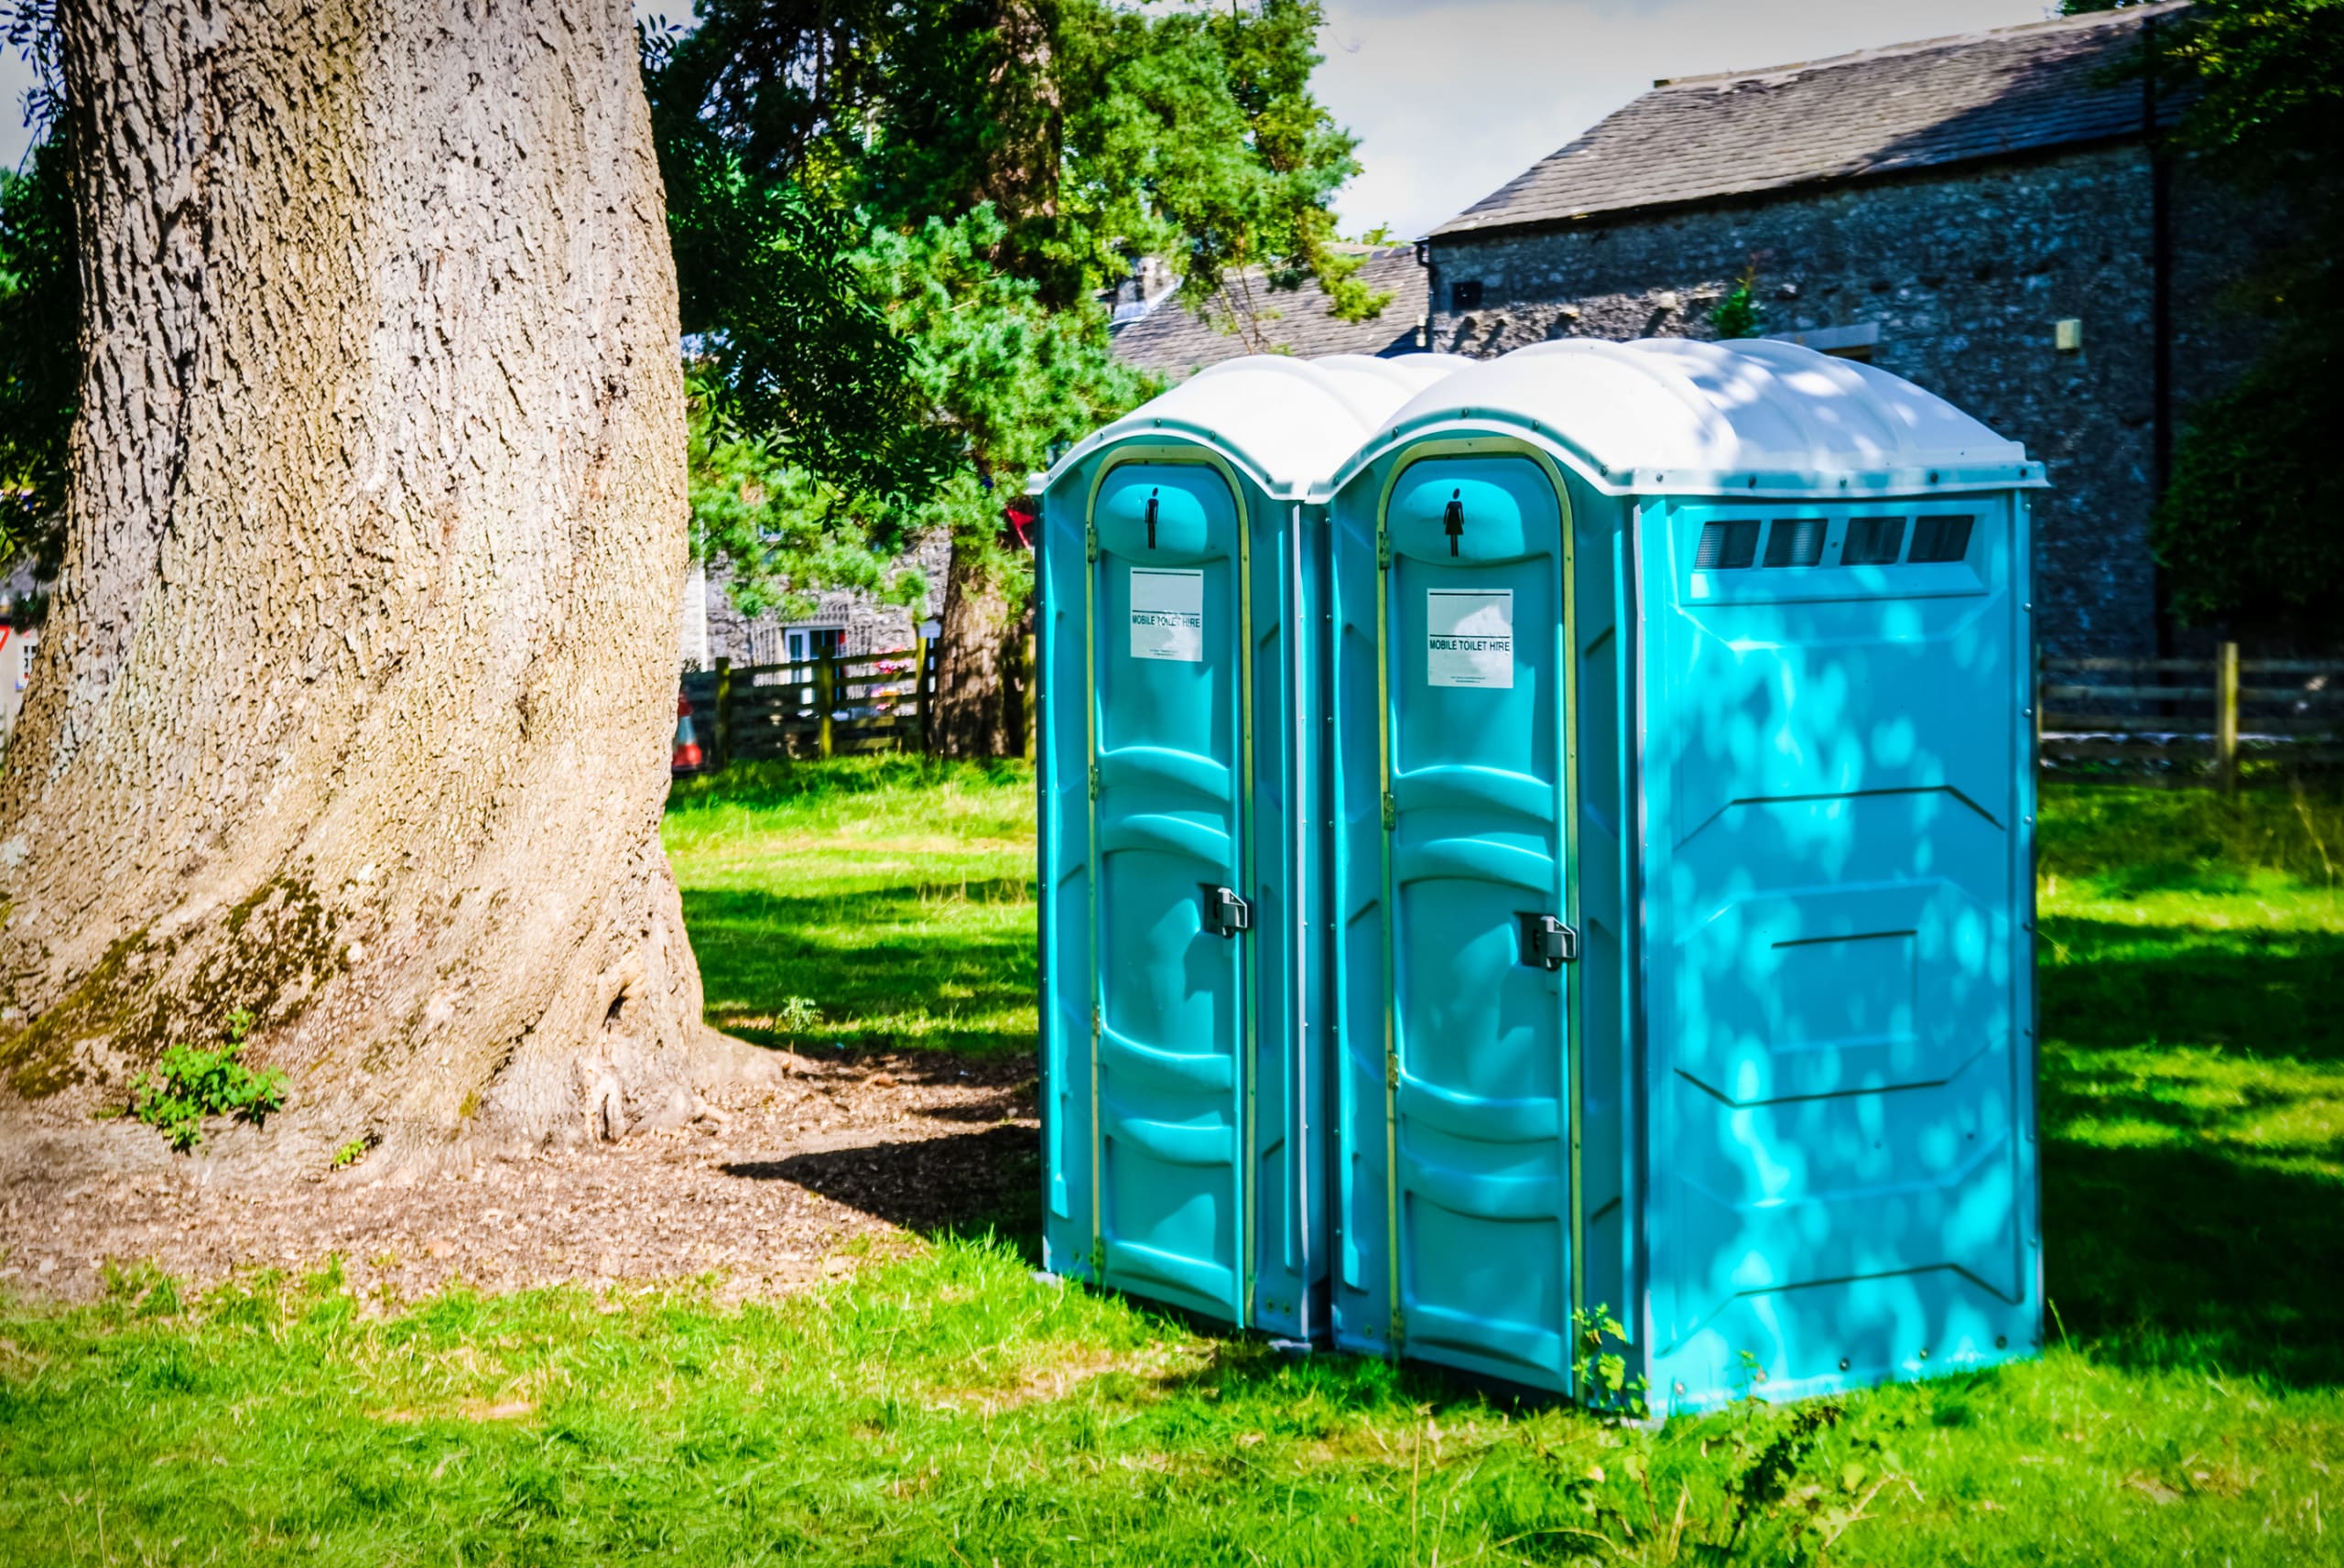 Two blue portable toilets next to trees in a field.